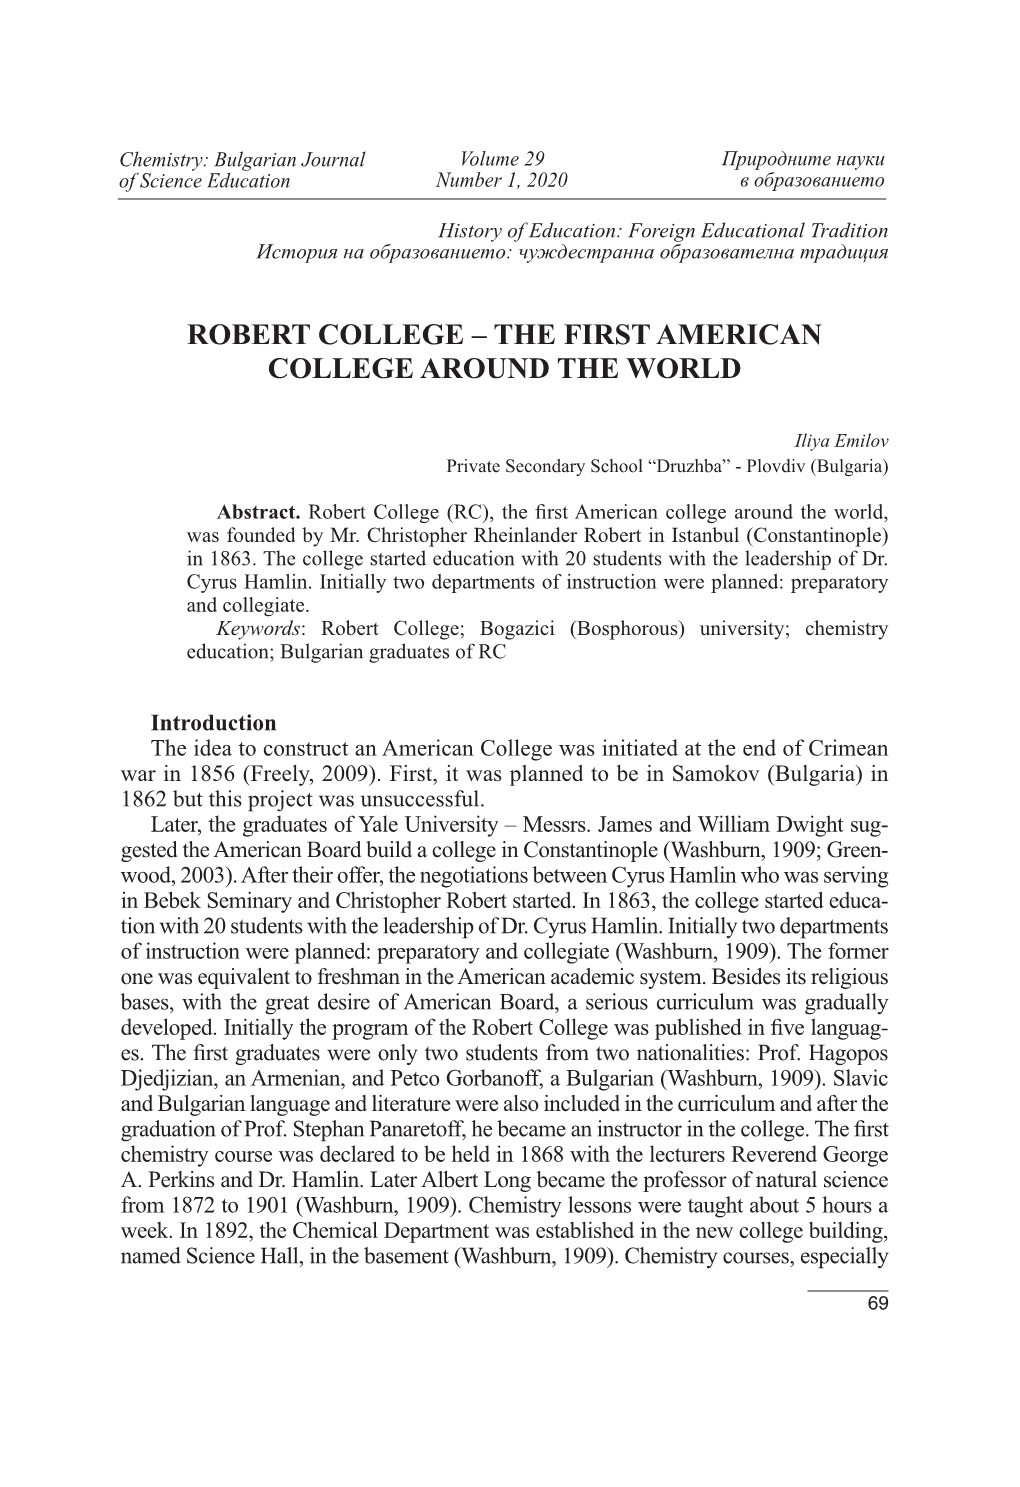 Robert College – the First American College Around the World